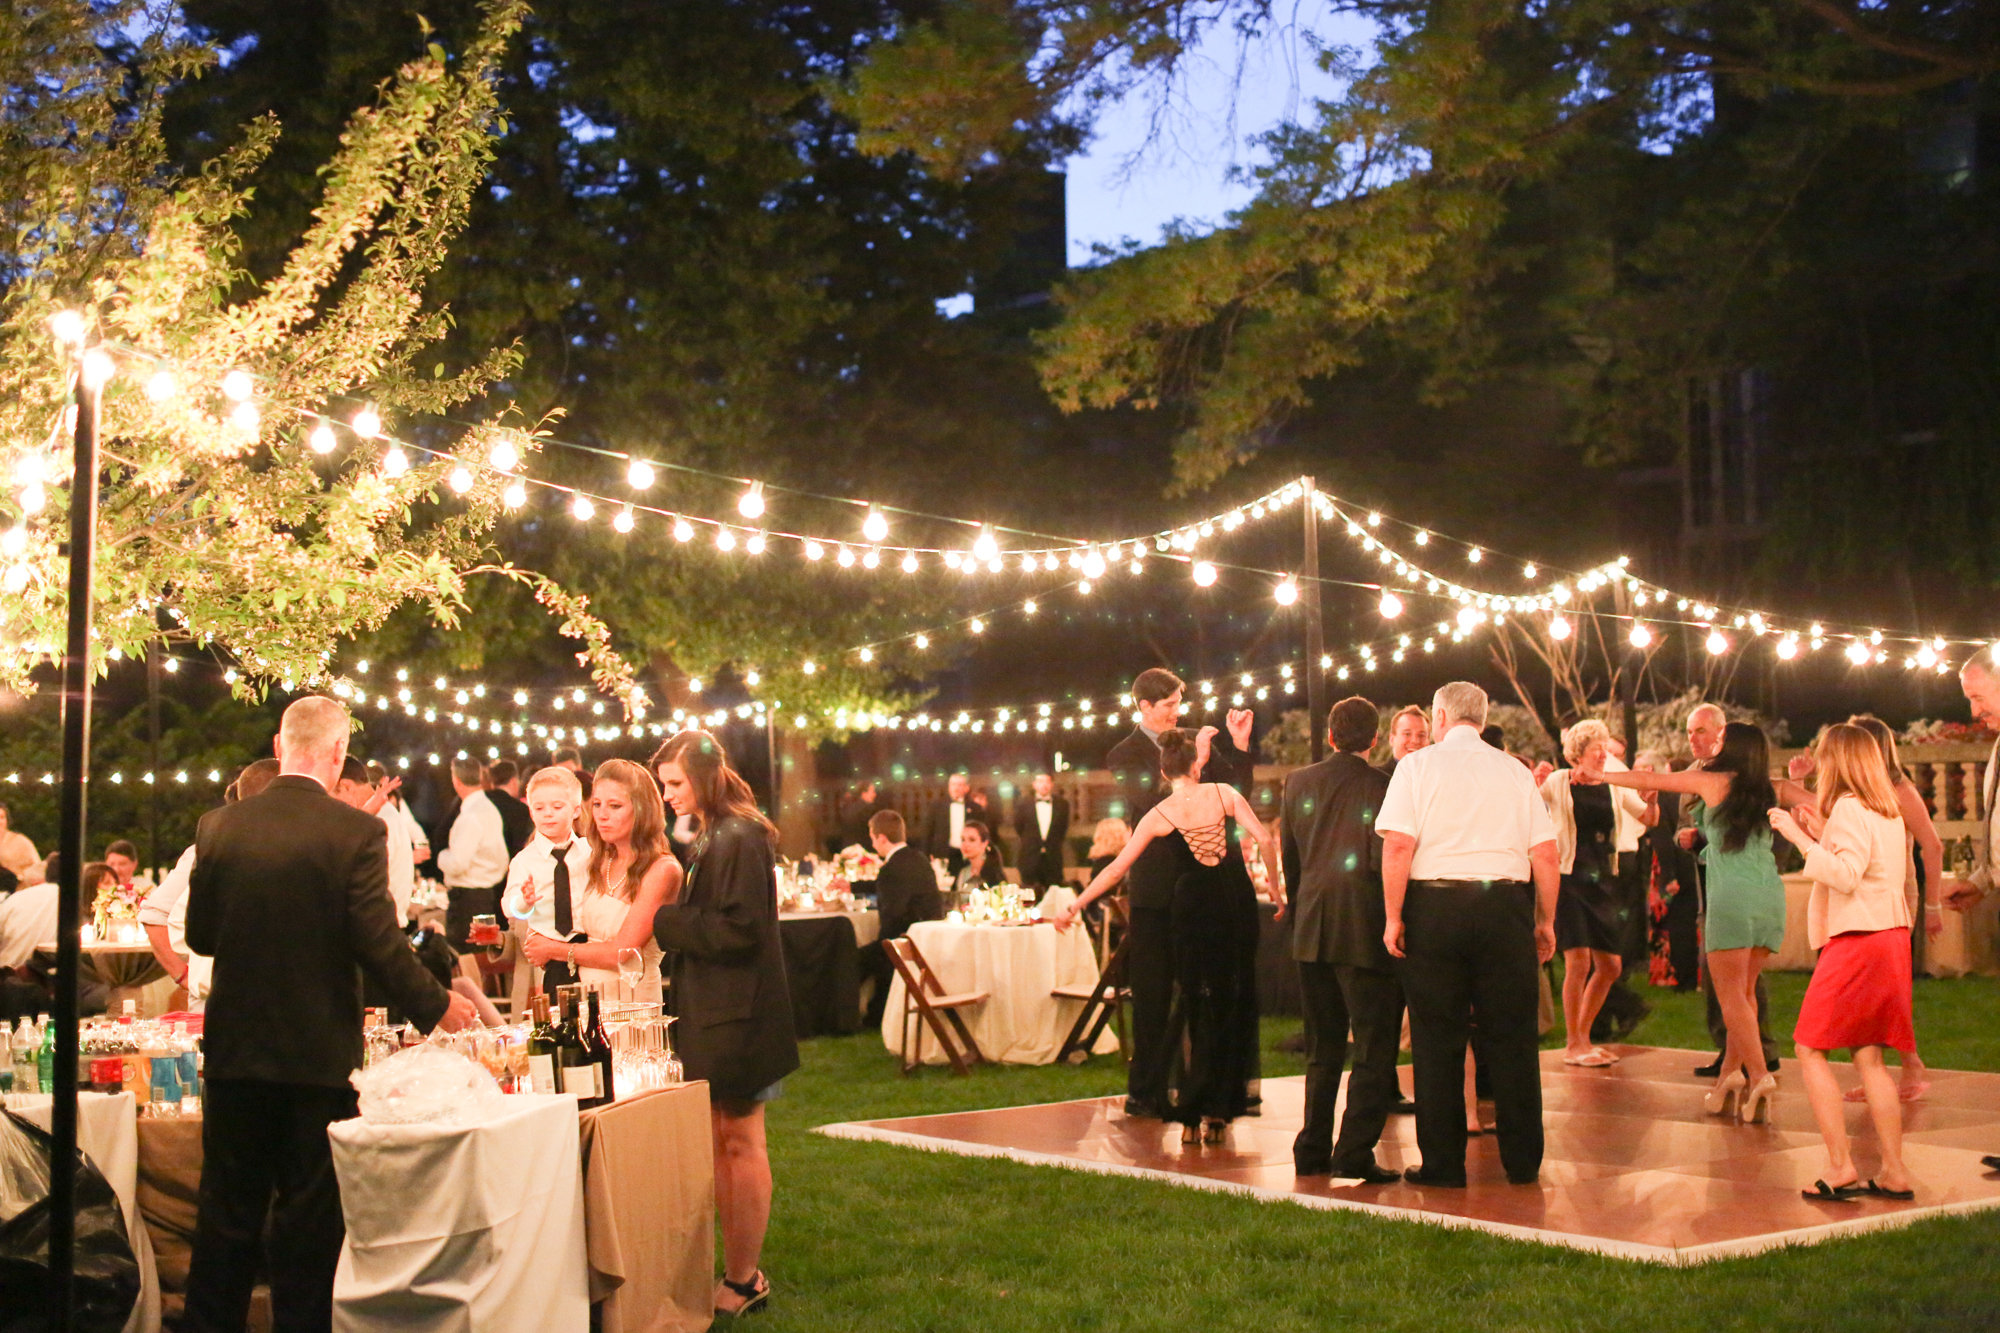 creative of outdoor wedding reception venues near me 17 best ideas about wedding venues oregon on pinterest outdoor